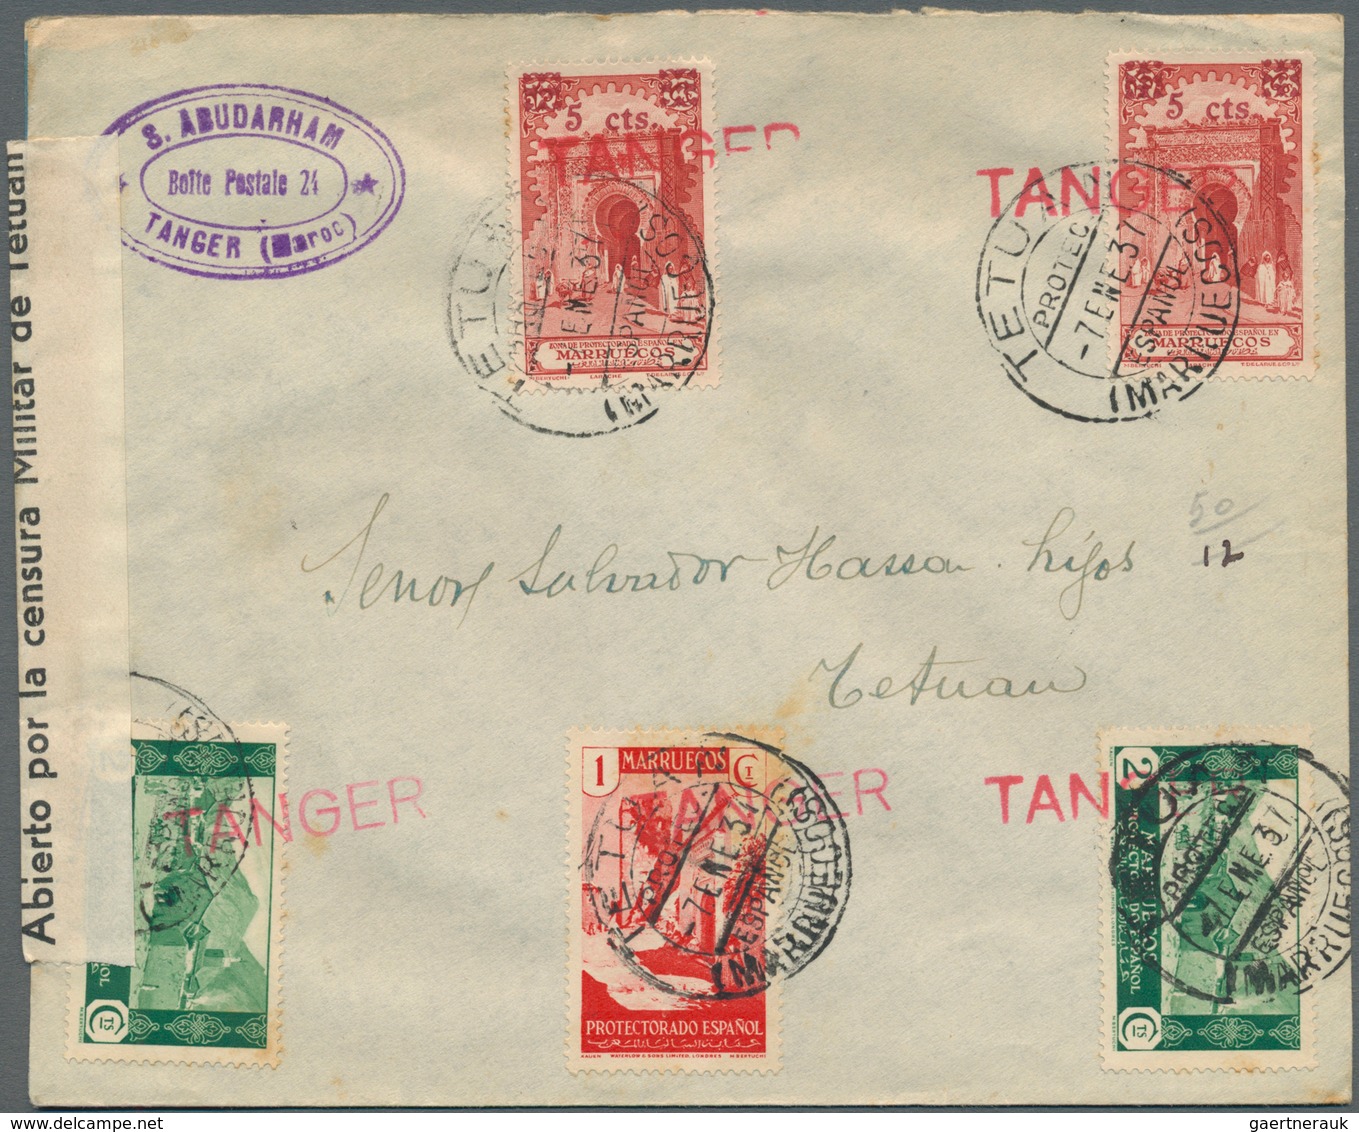 28235 Spanien: 1843/1944: 29 envelopes, picture postcards and postal stationeries including censored mail,